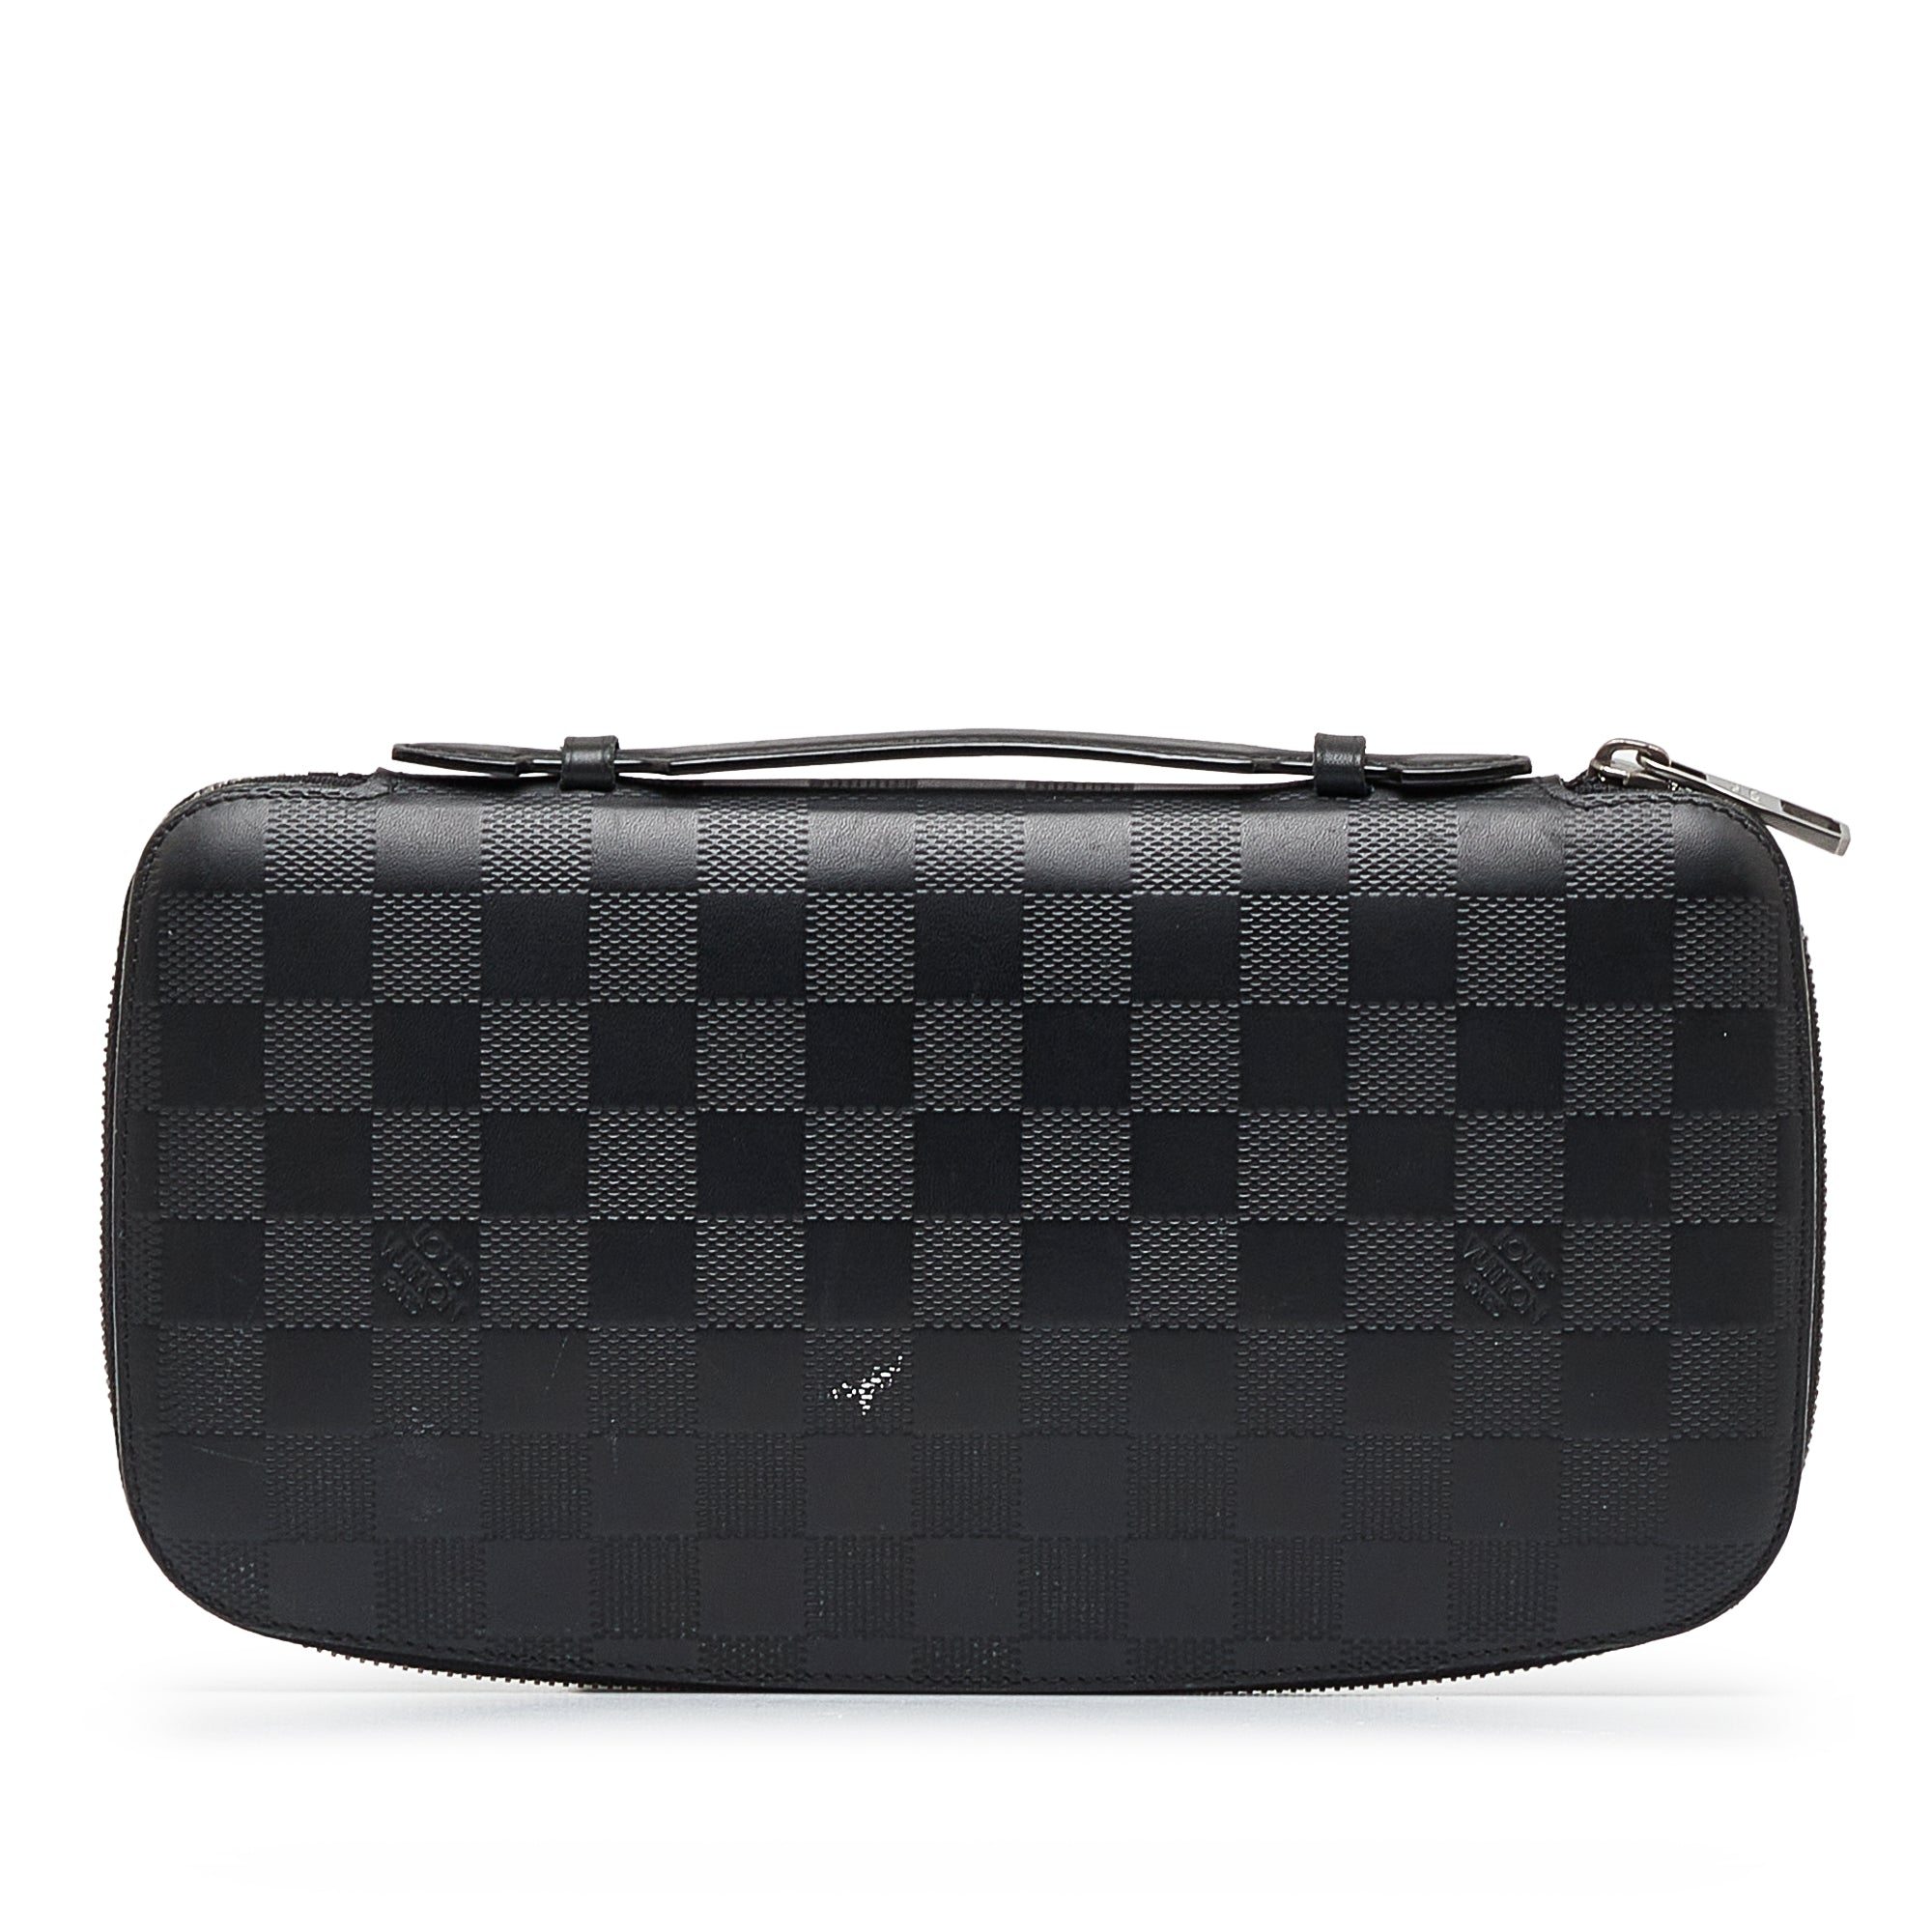 Zippy XL Wallet Damier Infini - Wallets and Small Leather Goods